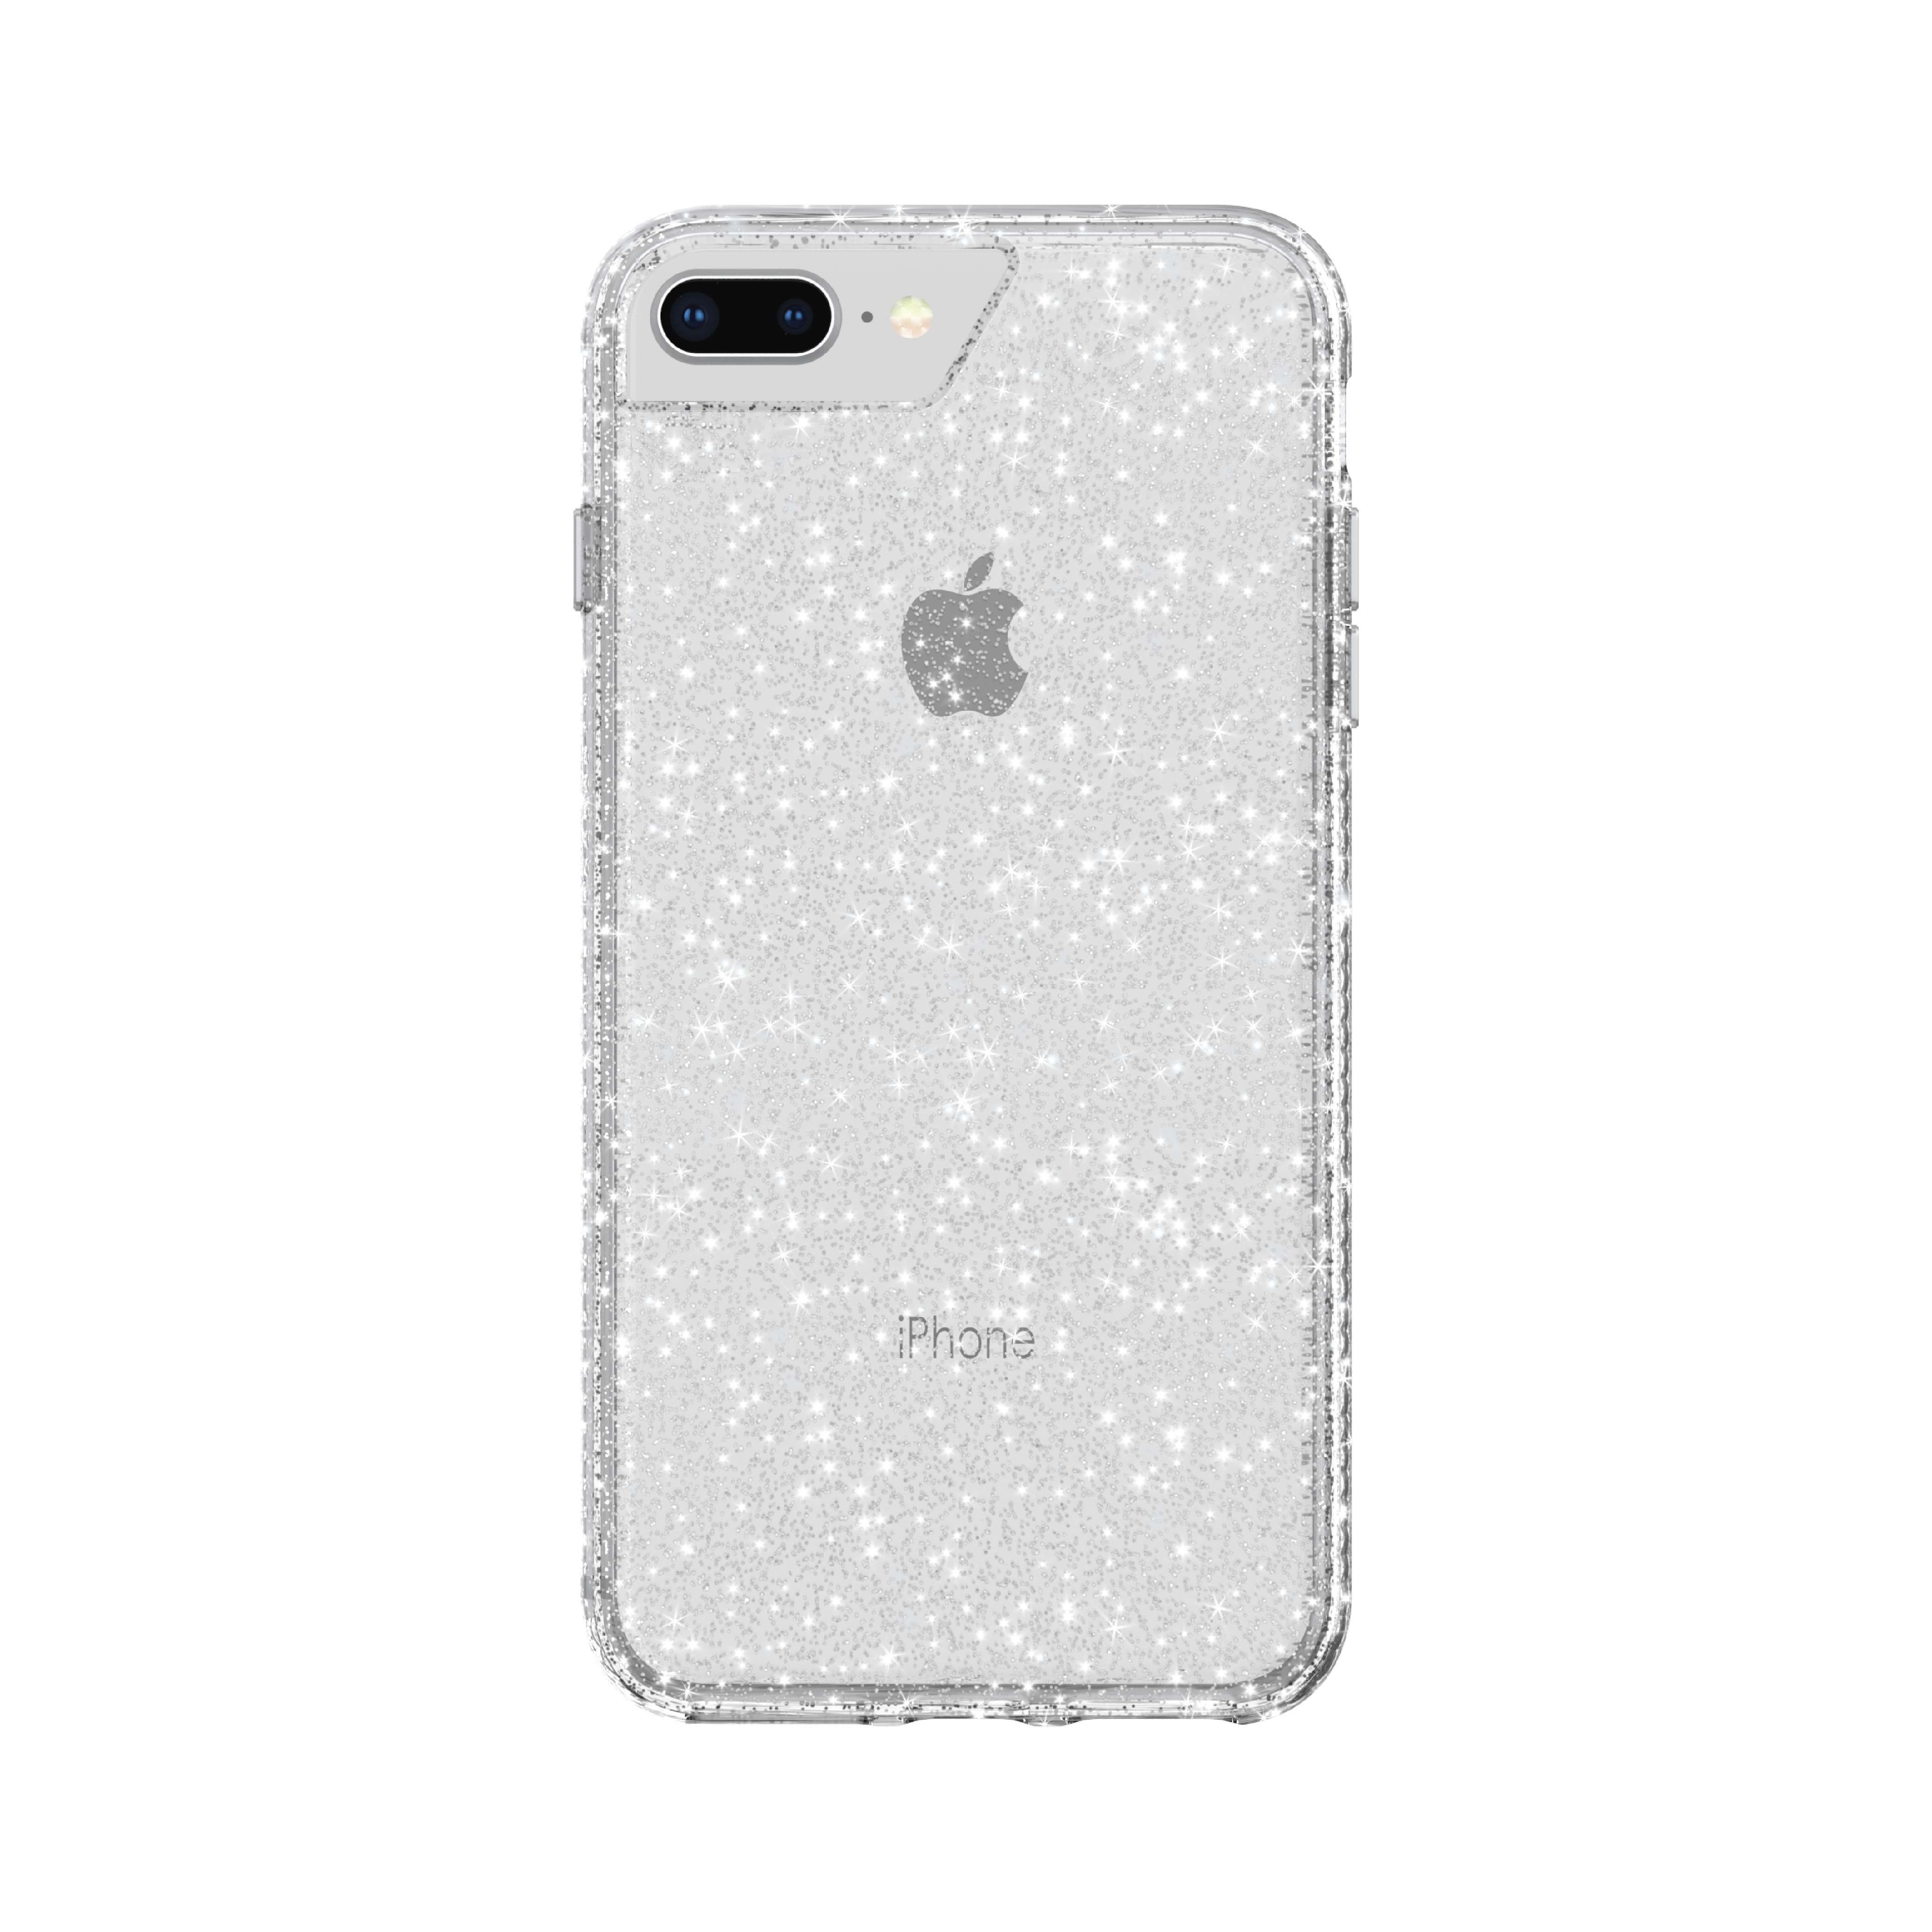 RASH Accessories TPU Bumper Case for iPhone 6/6S Cover Clear With Free Tempered Glass New ShockProof Silicone Case